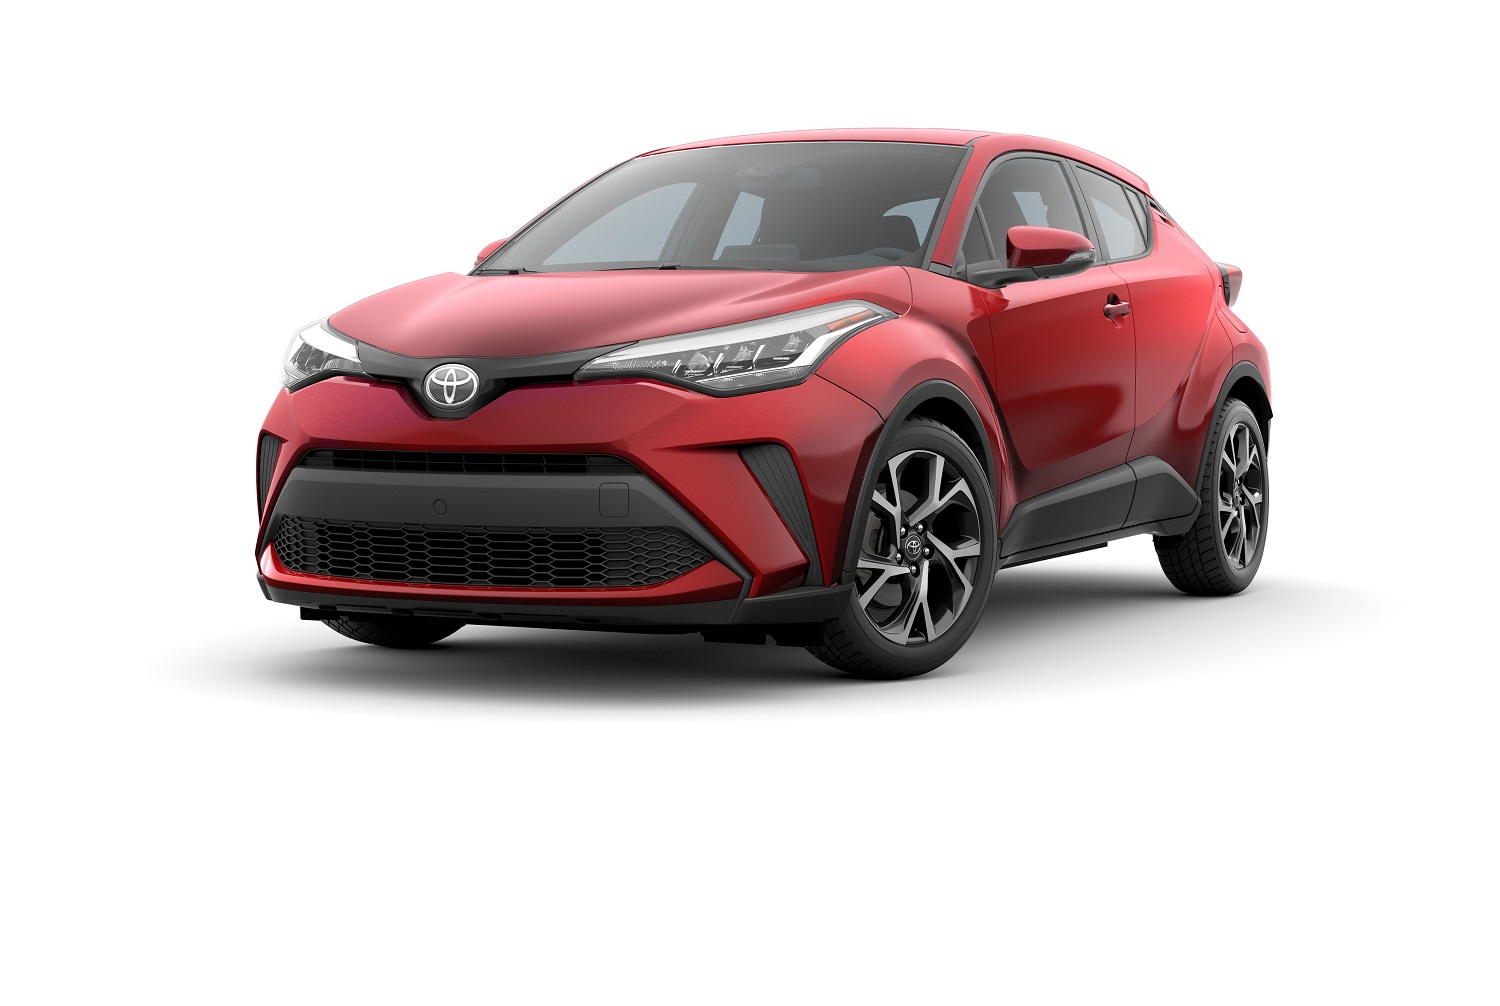 2020 toyota c hr crossover gets standard android auto compatibility chr 03